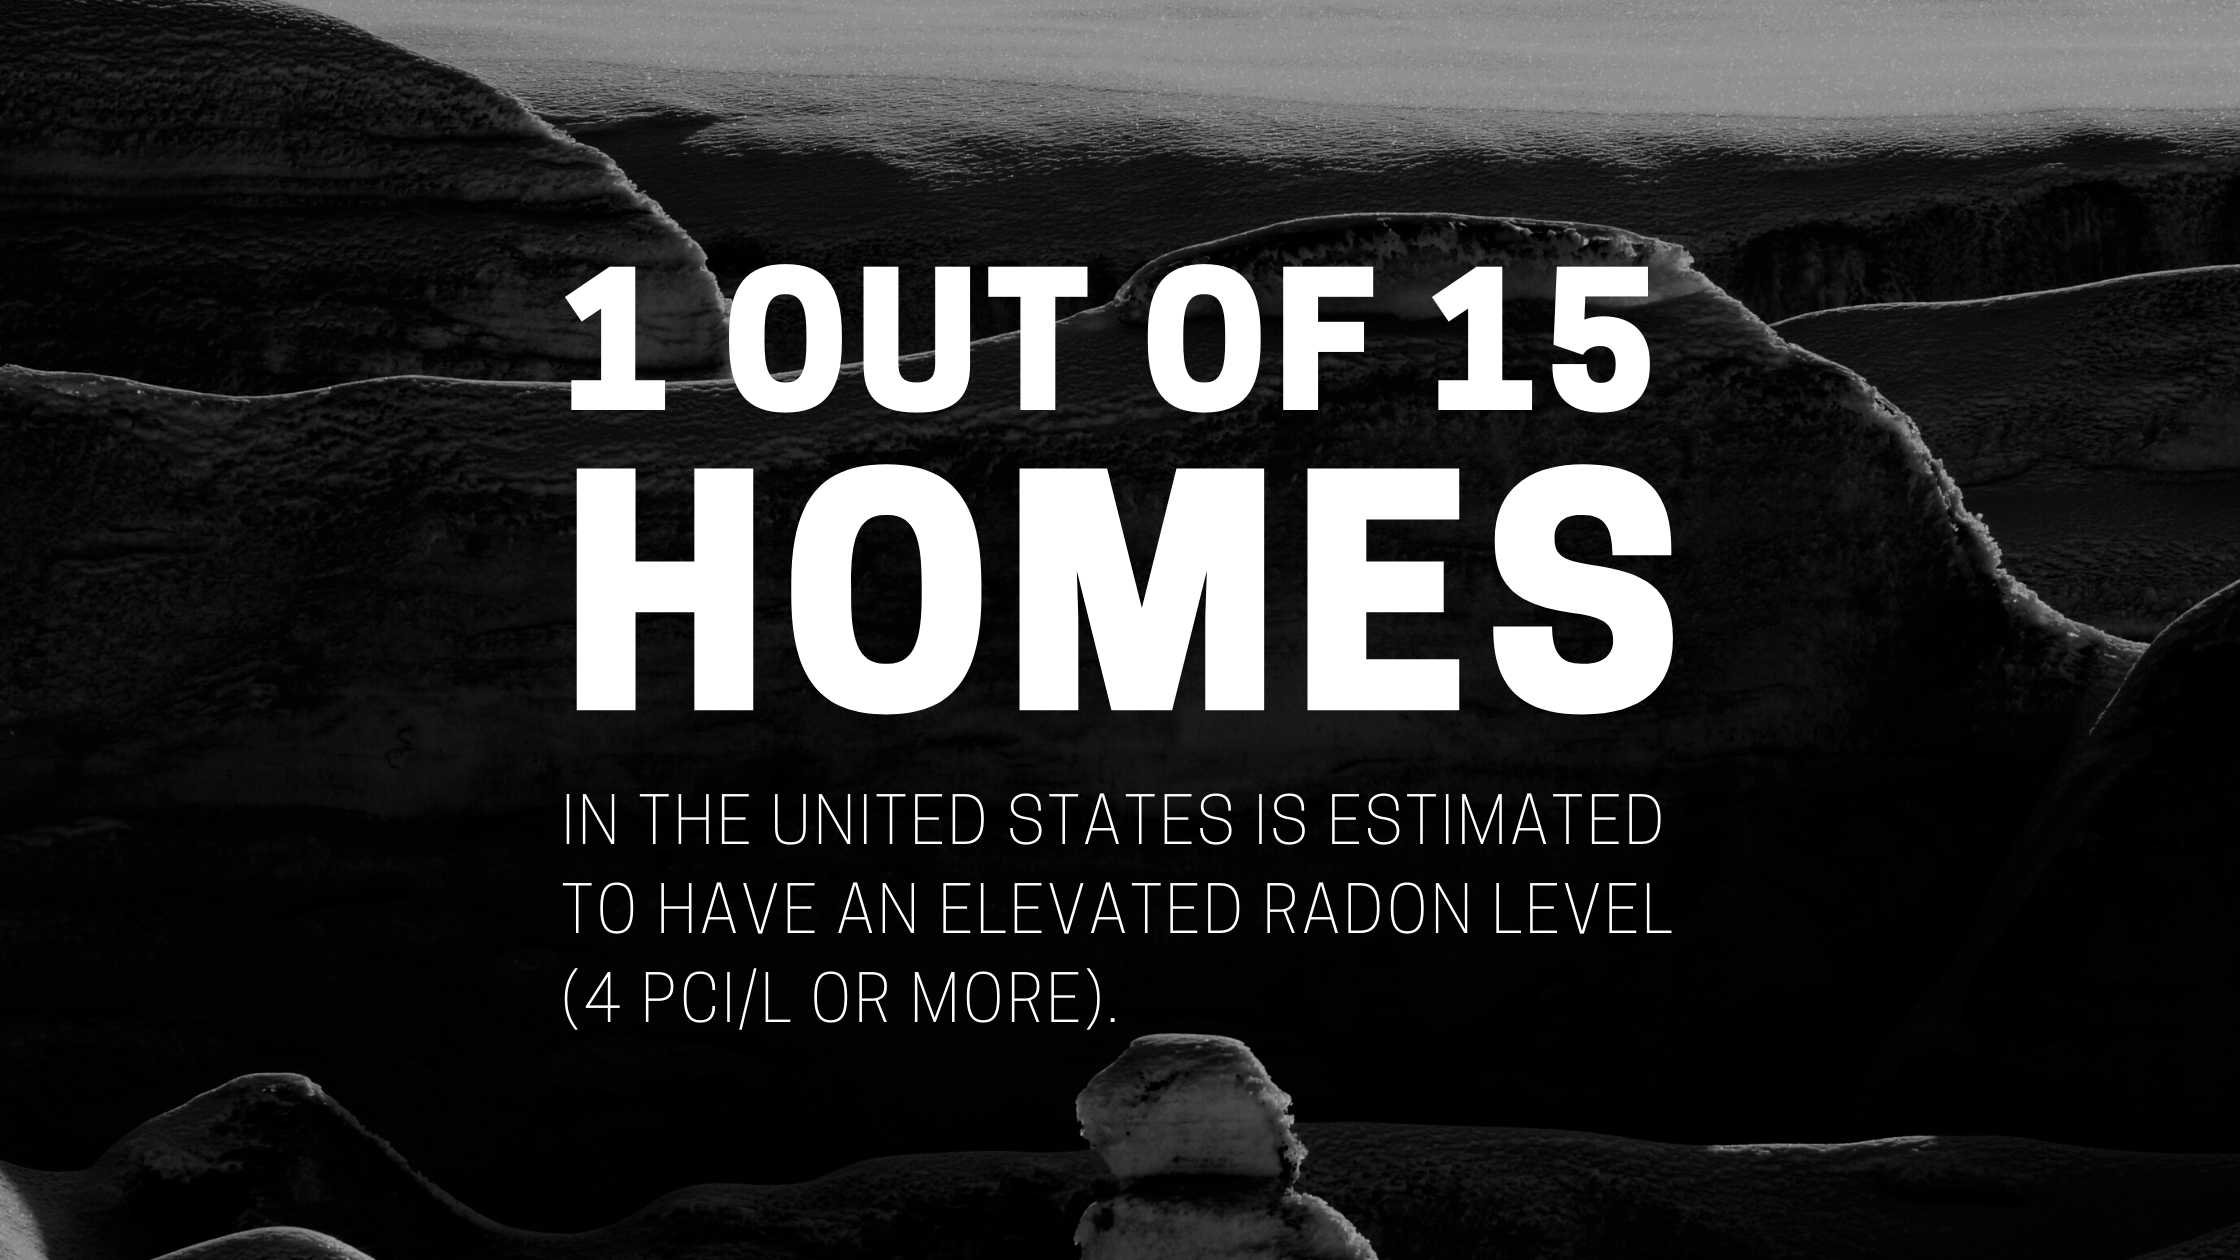 Do You Know if Your House has Radon?